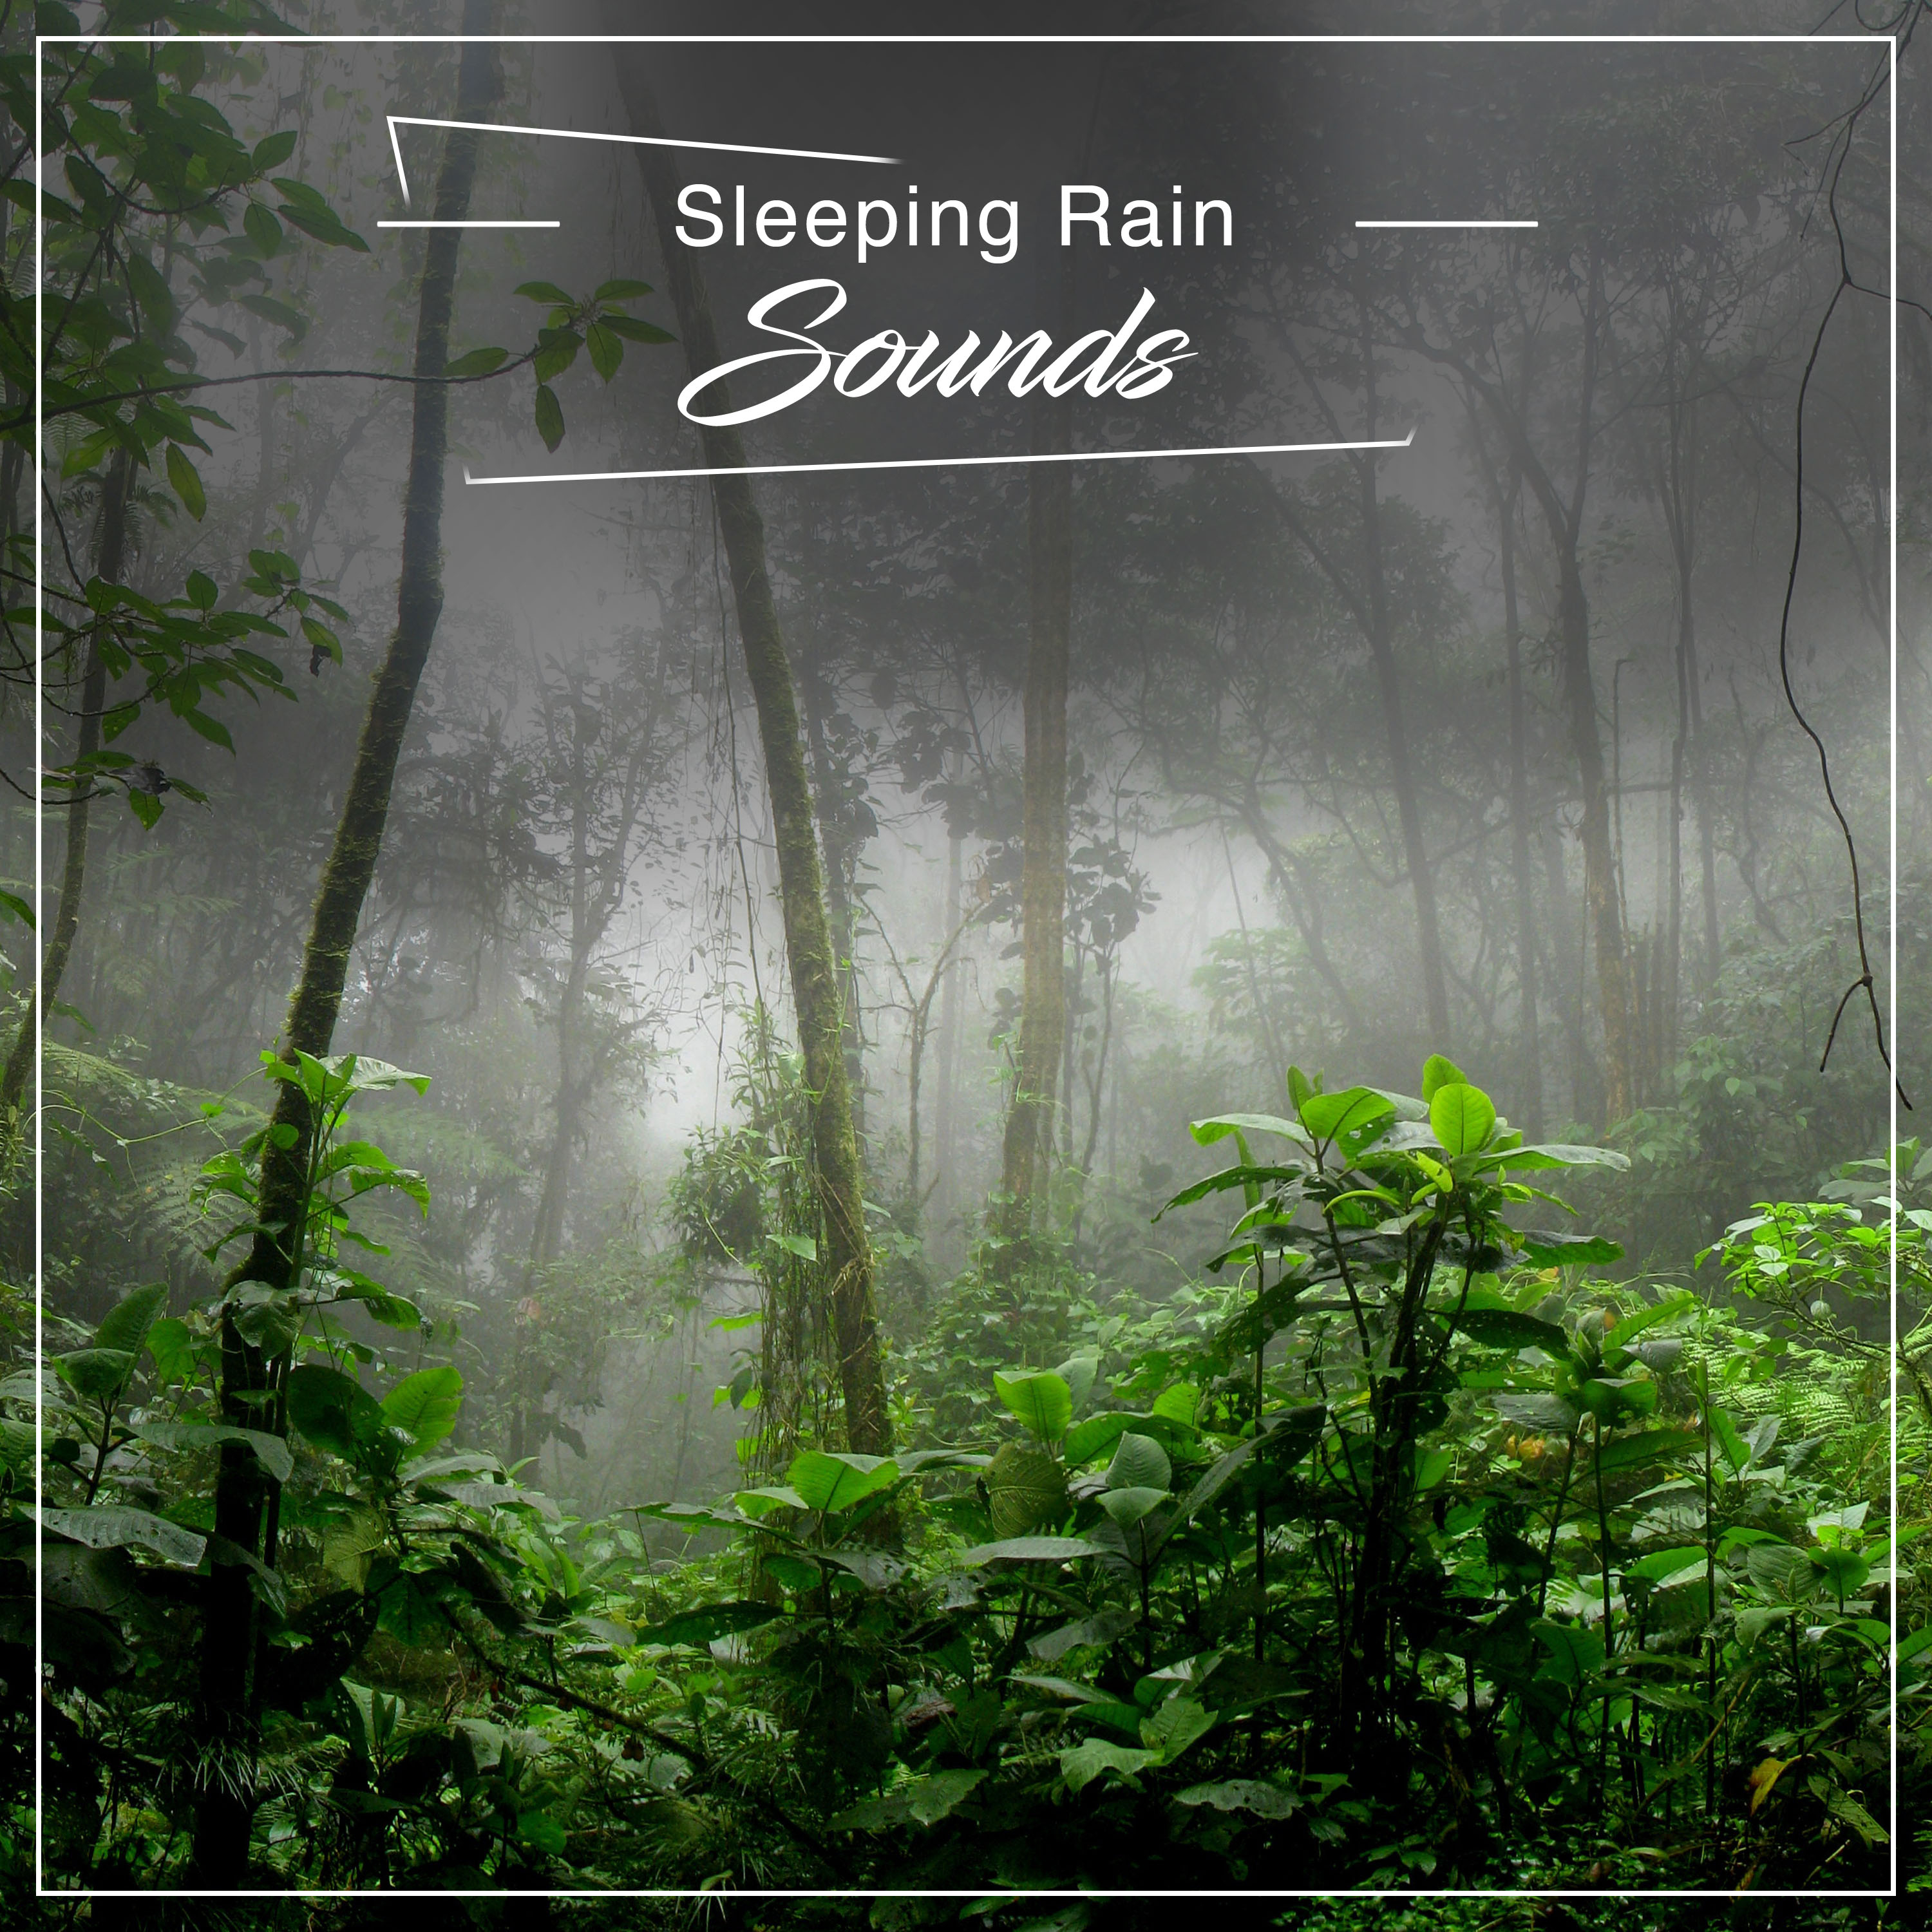 18 Sleeping Rain Sounds to Rest Your Mind